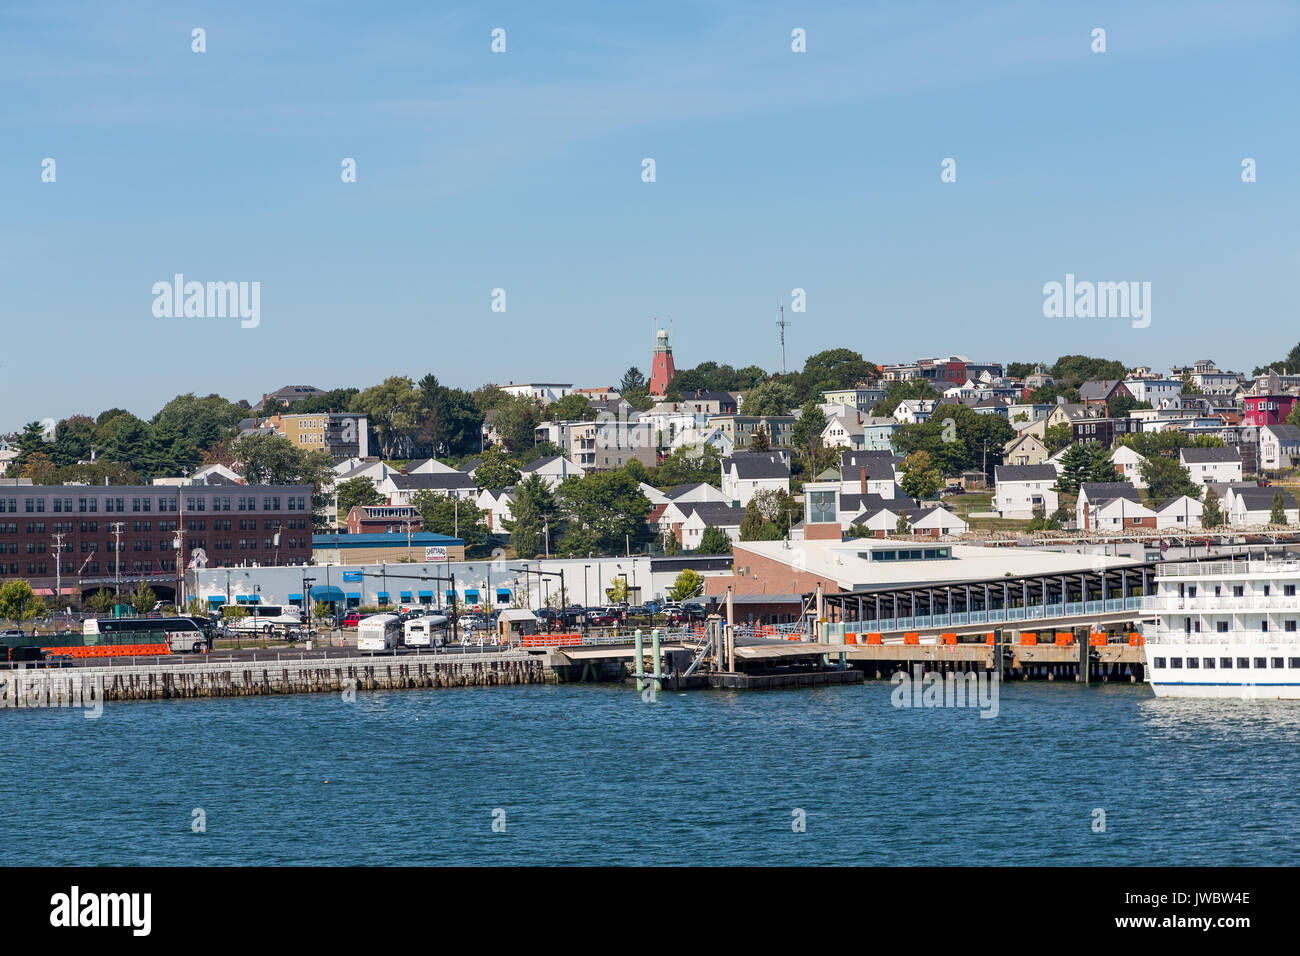 Waterfront at Touritst Harbor in Portland Maine Stock Photo